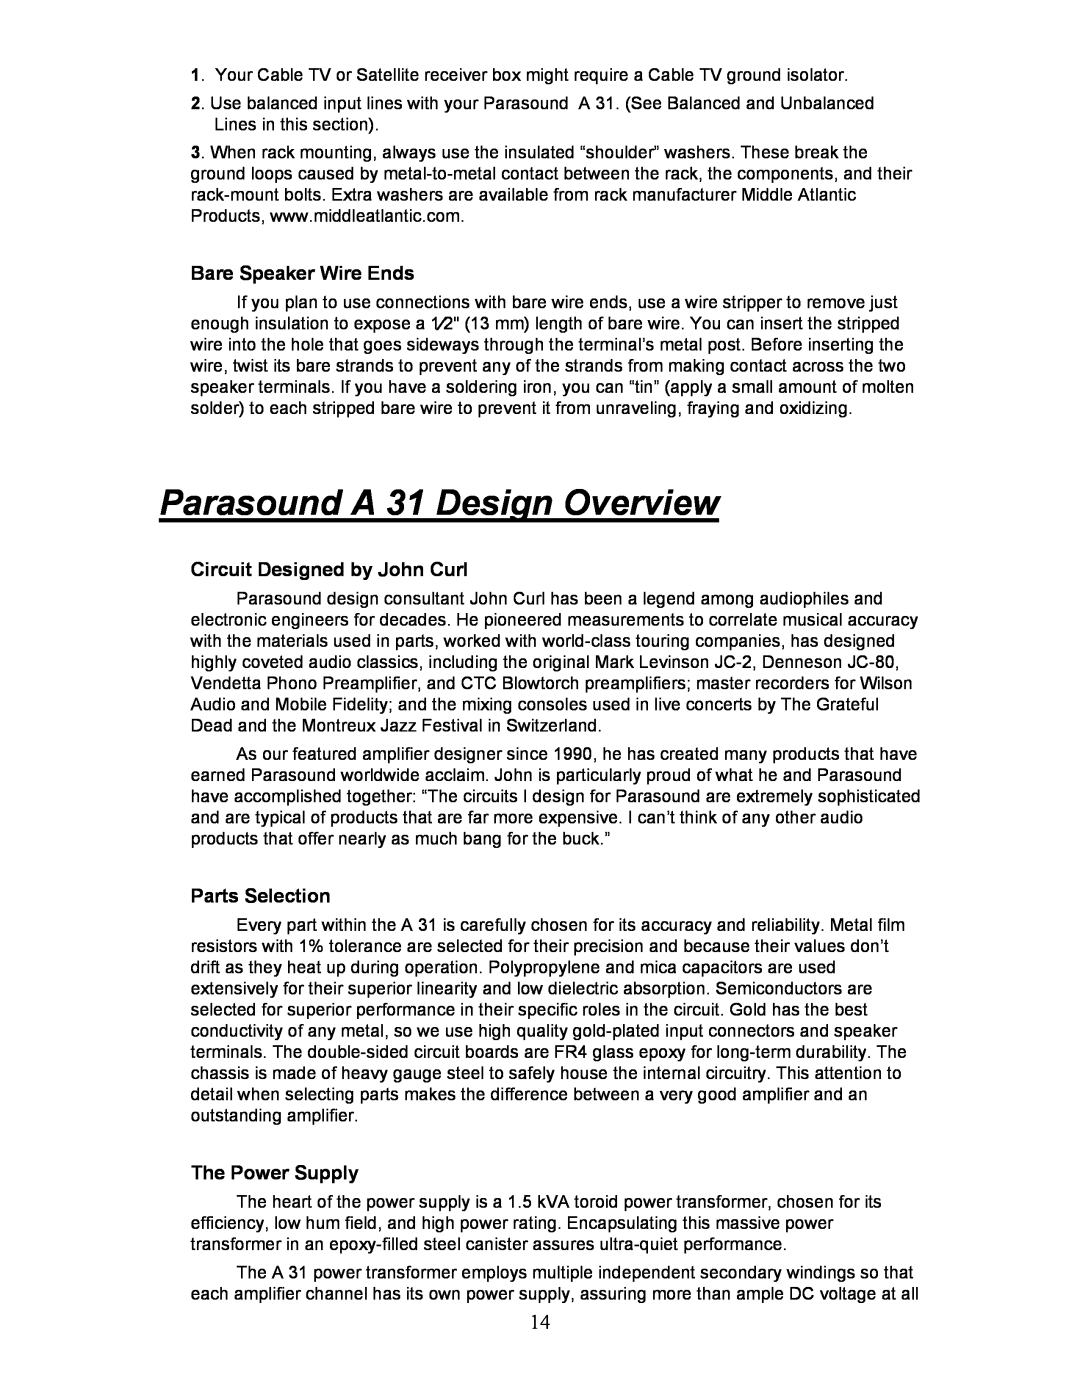 Parasound manual Parasound A 31 Design Overview, Bare Speaker Wire Ends, Circuit Designed by John Curl, Parts Selection 